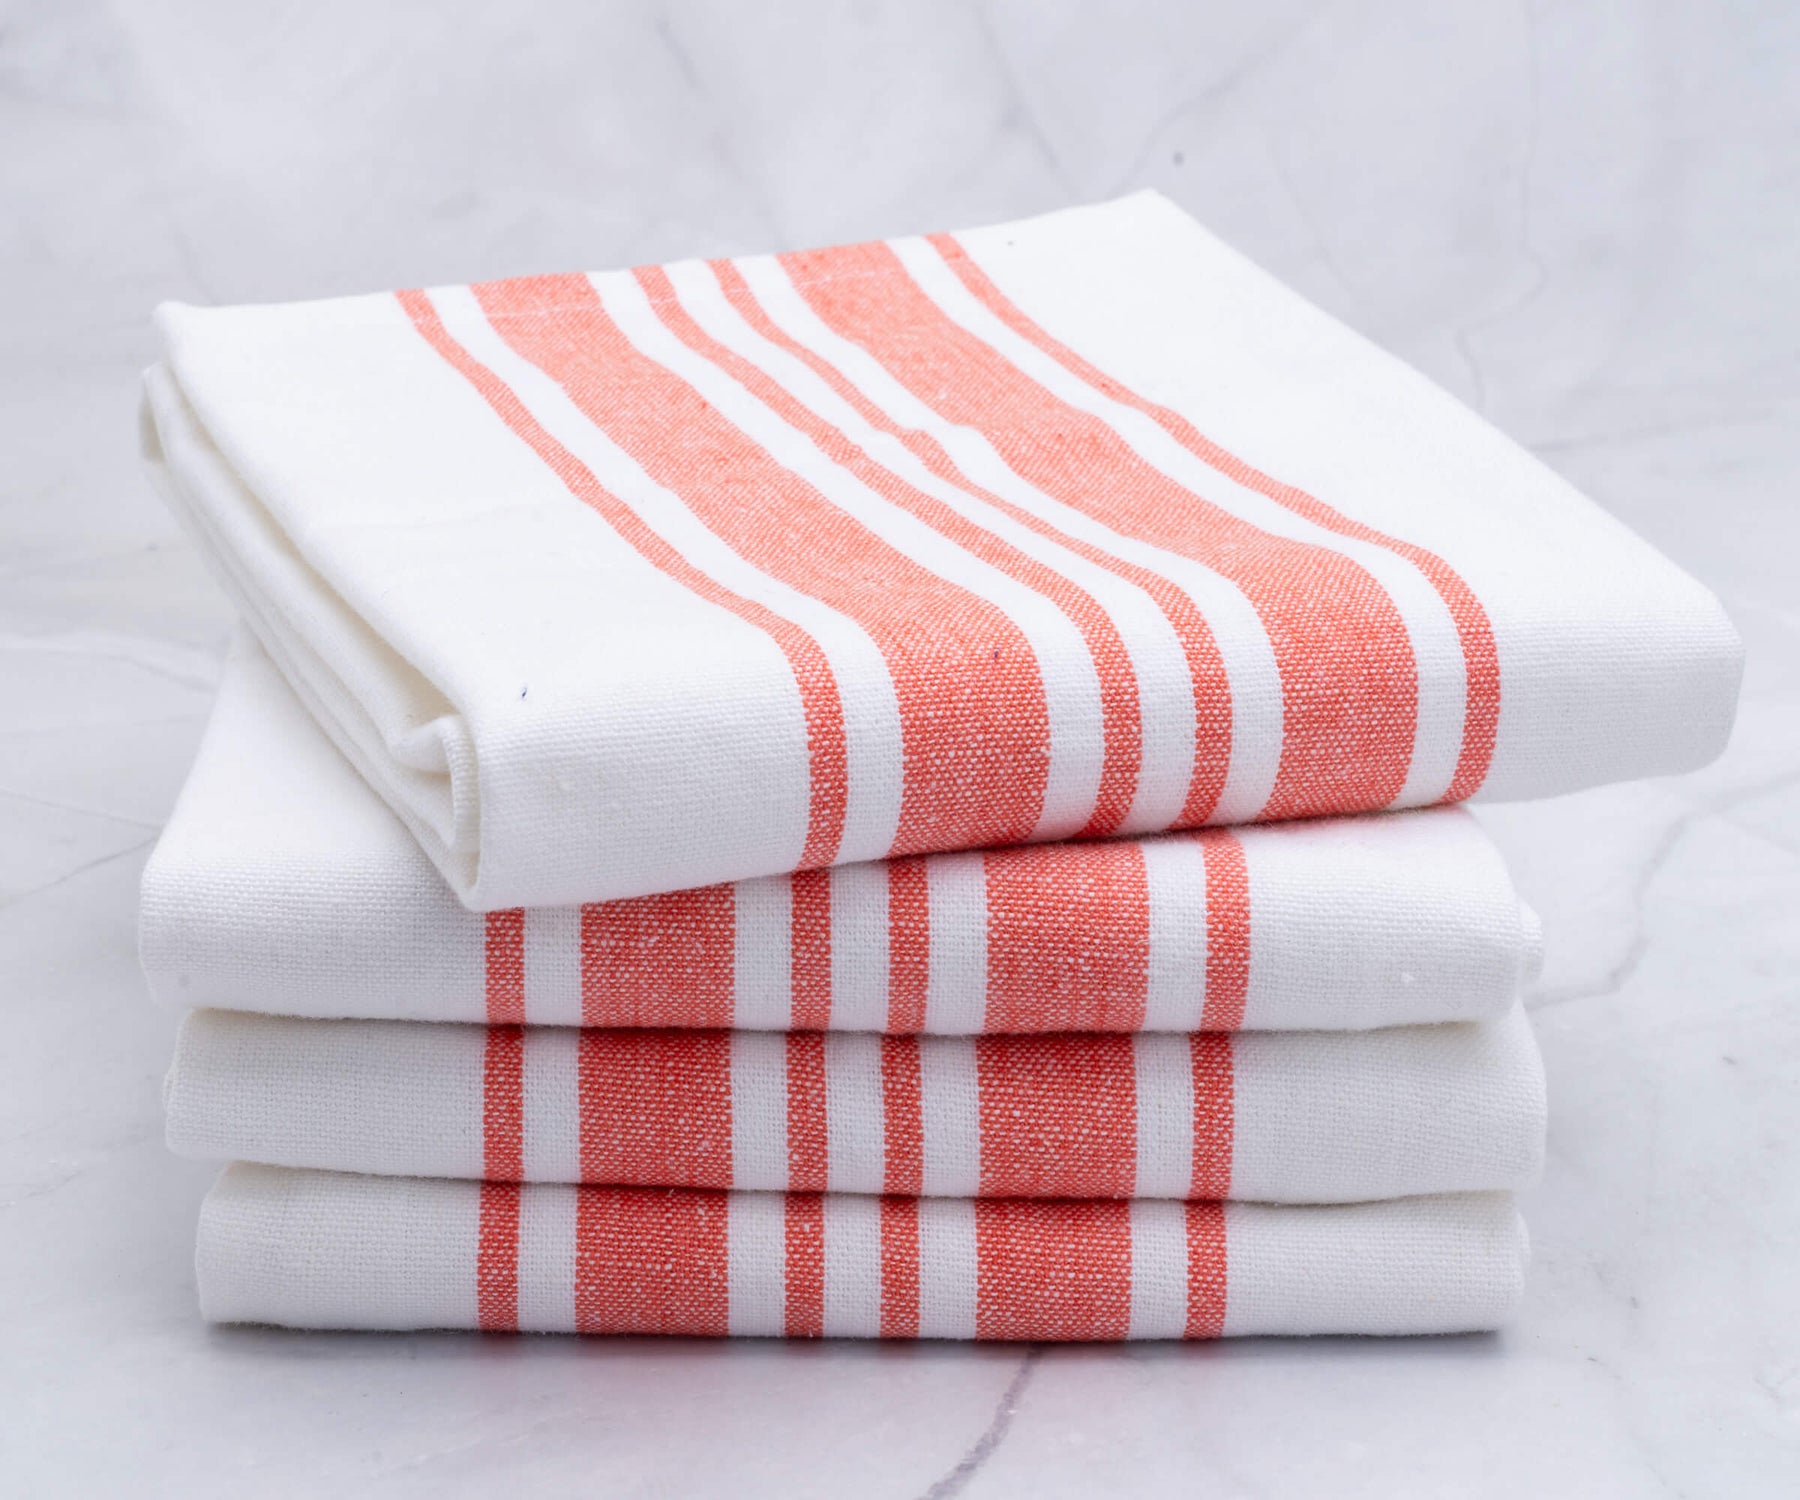 White and Red Piano Stripe Kitchen Towel – MARCH